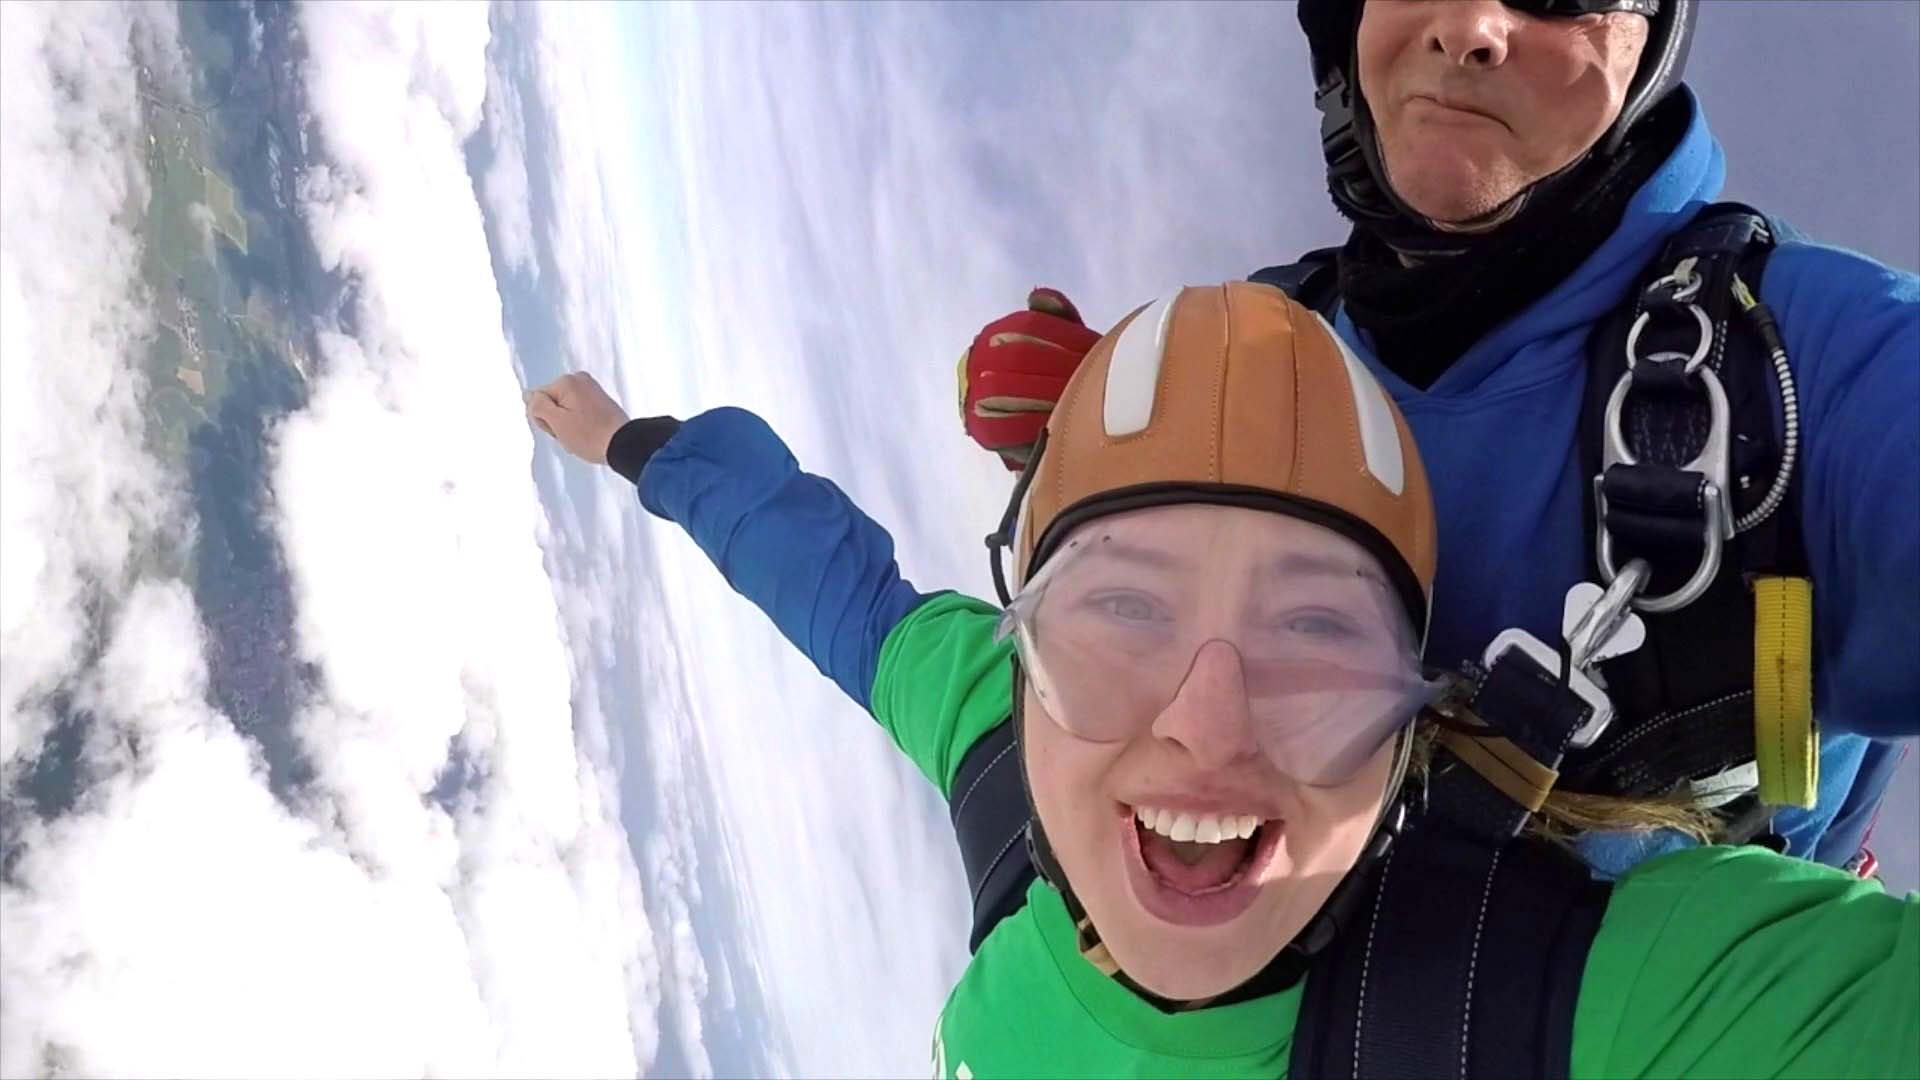 Skydive in Aid of Epilepsy Research